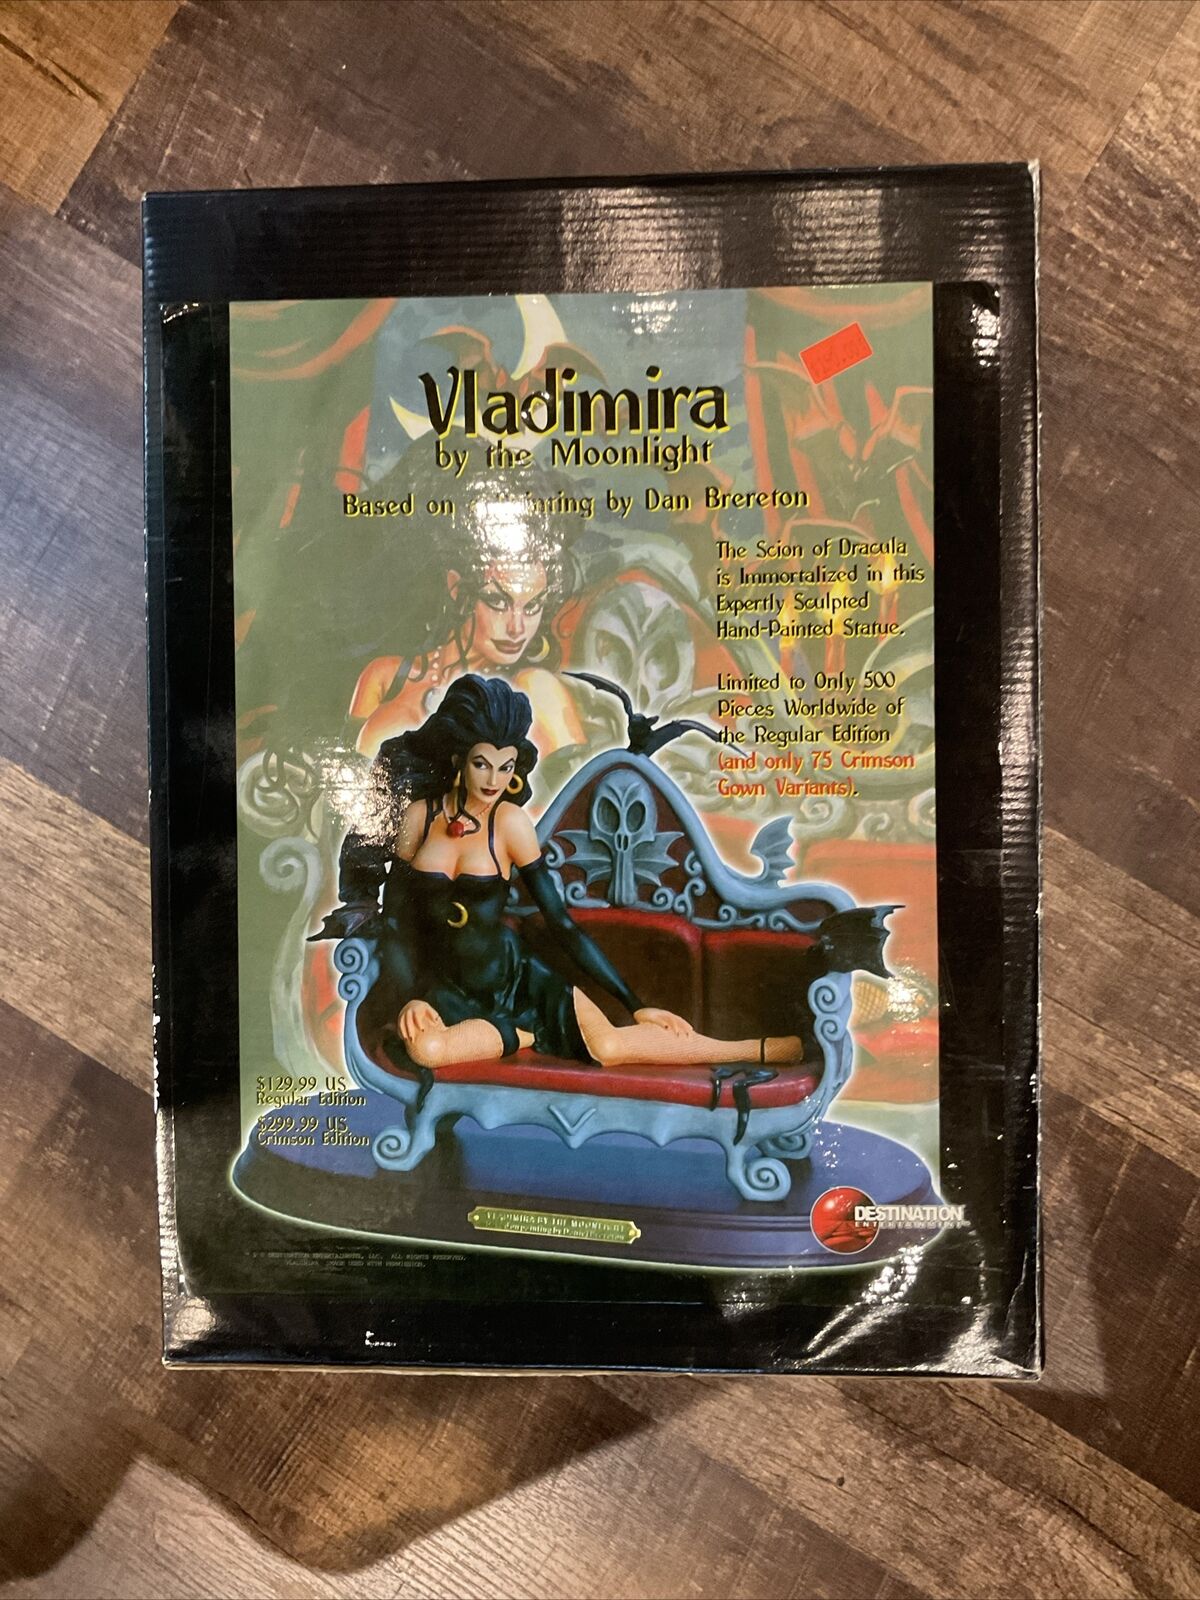 Vladimira by the Moonlight Limited 75 Crimson Gown Edition AS IS